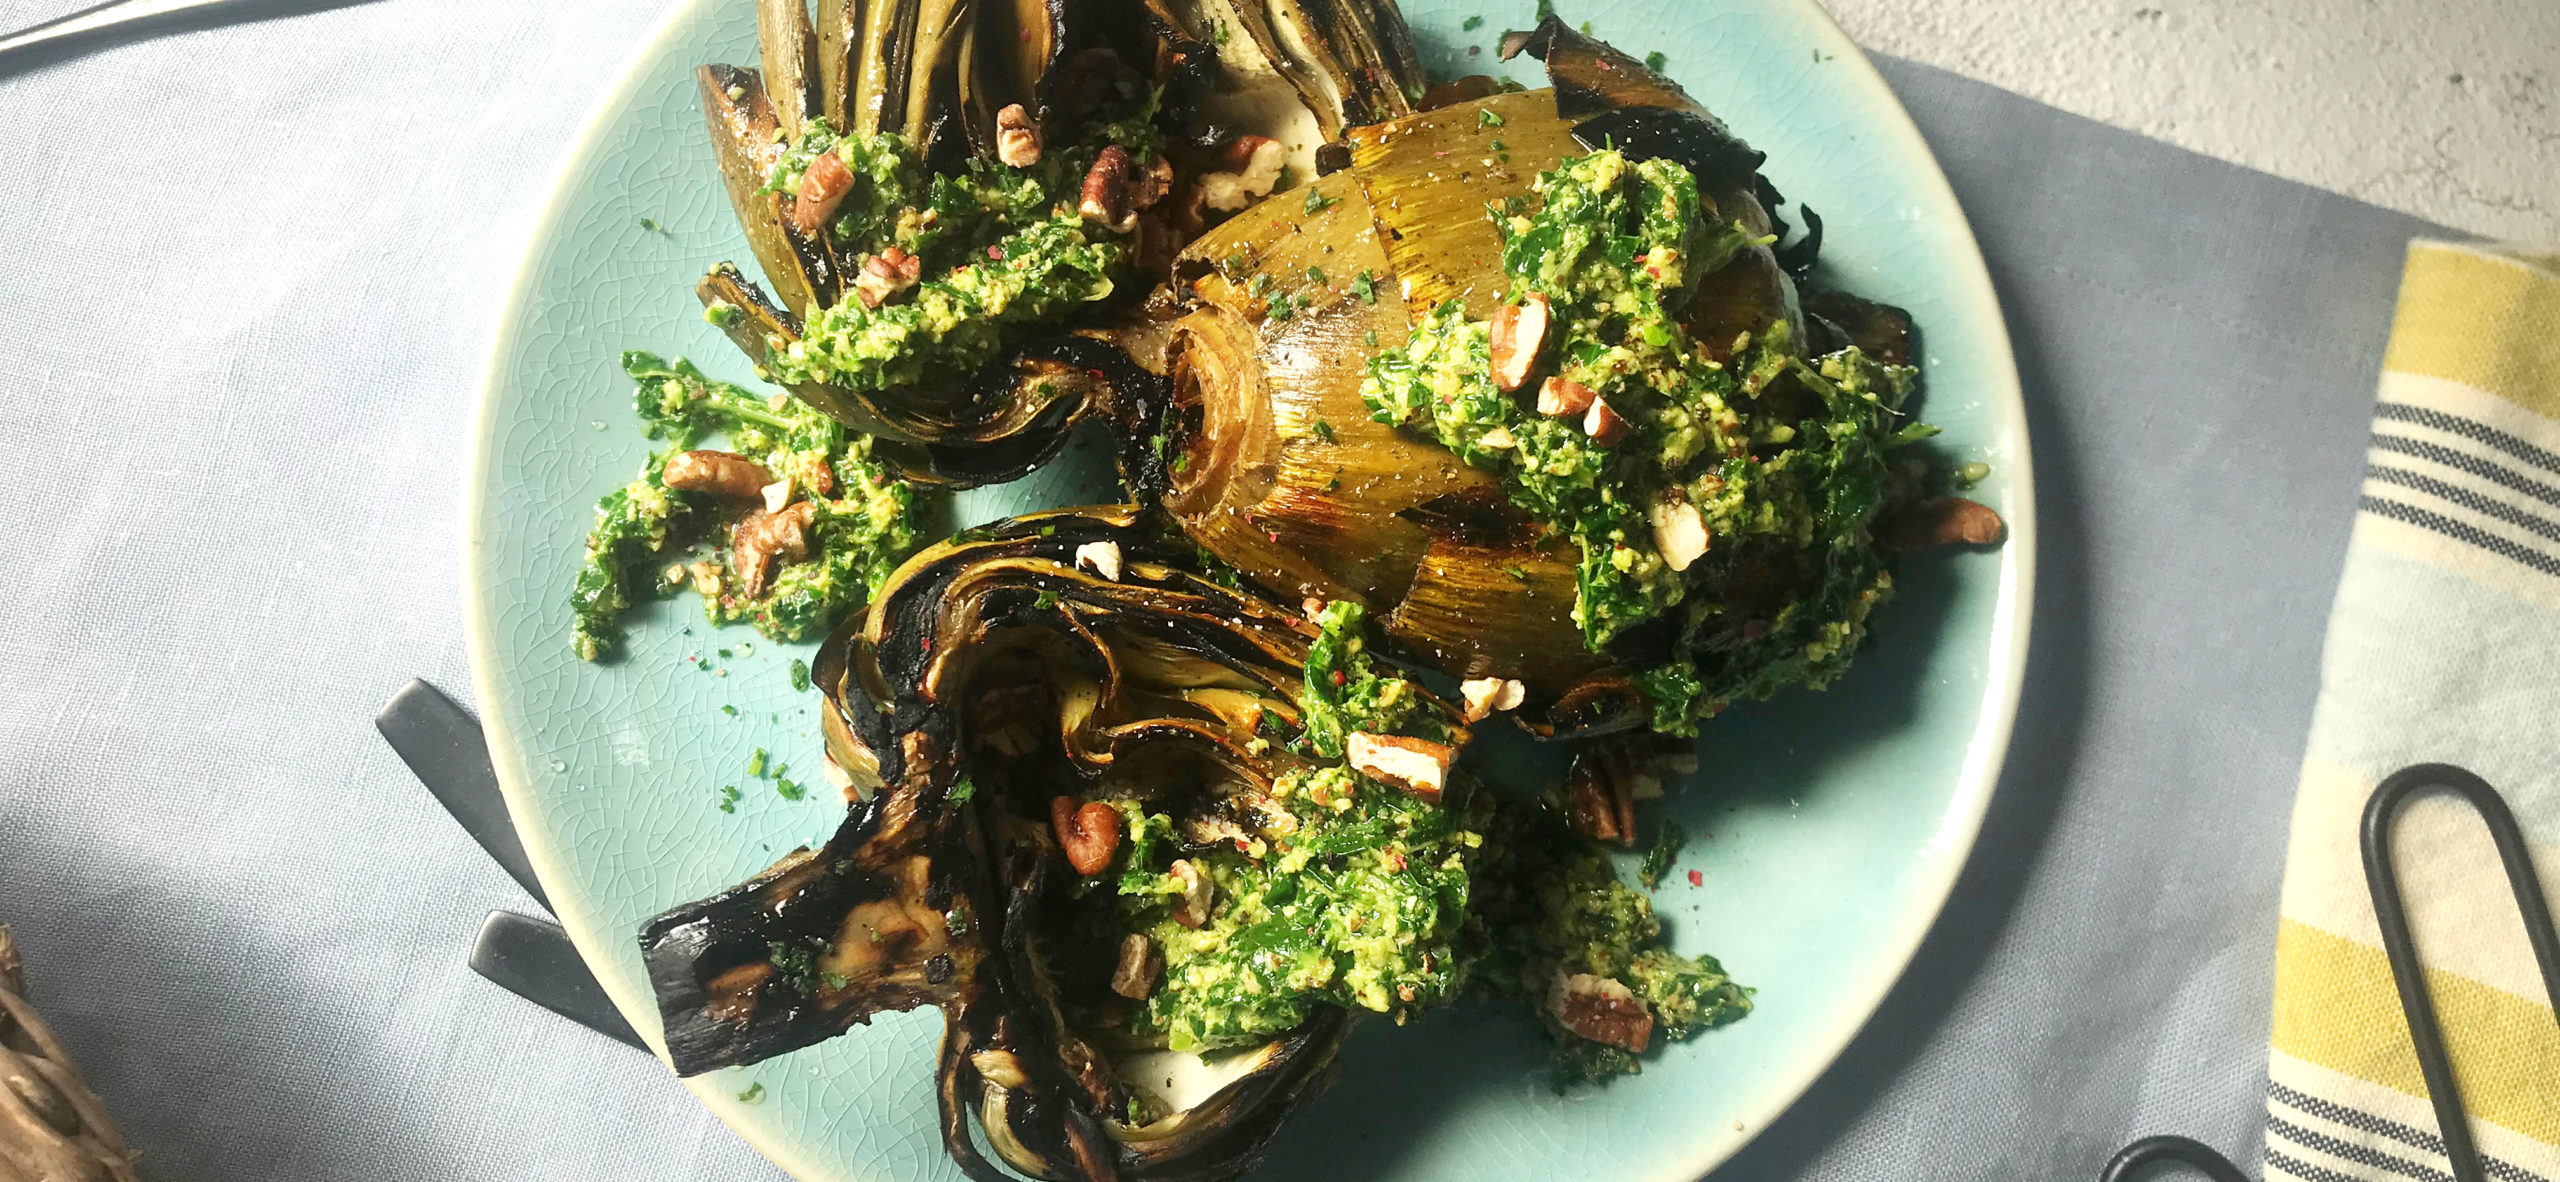 Grilled Artichokes with Mustard Greens Pesto